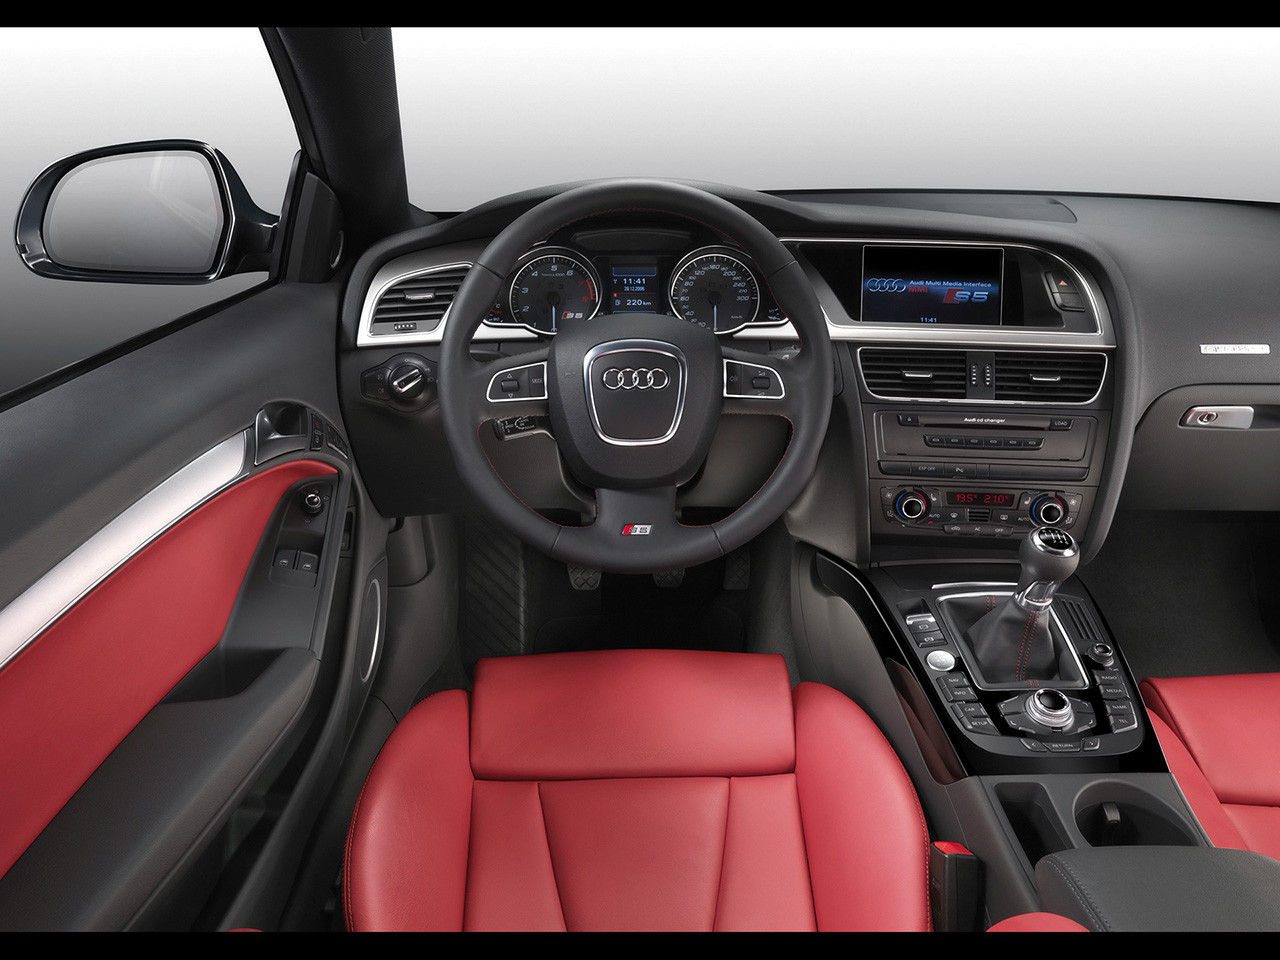 Audi A5 Interior Is A Very Expensive Luxury Car Popular 